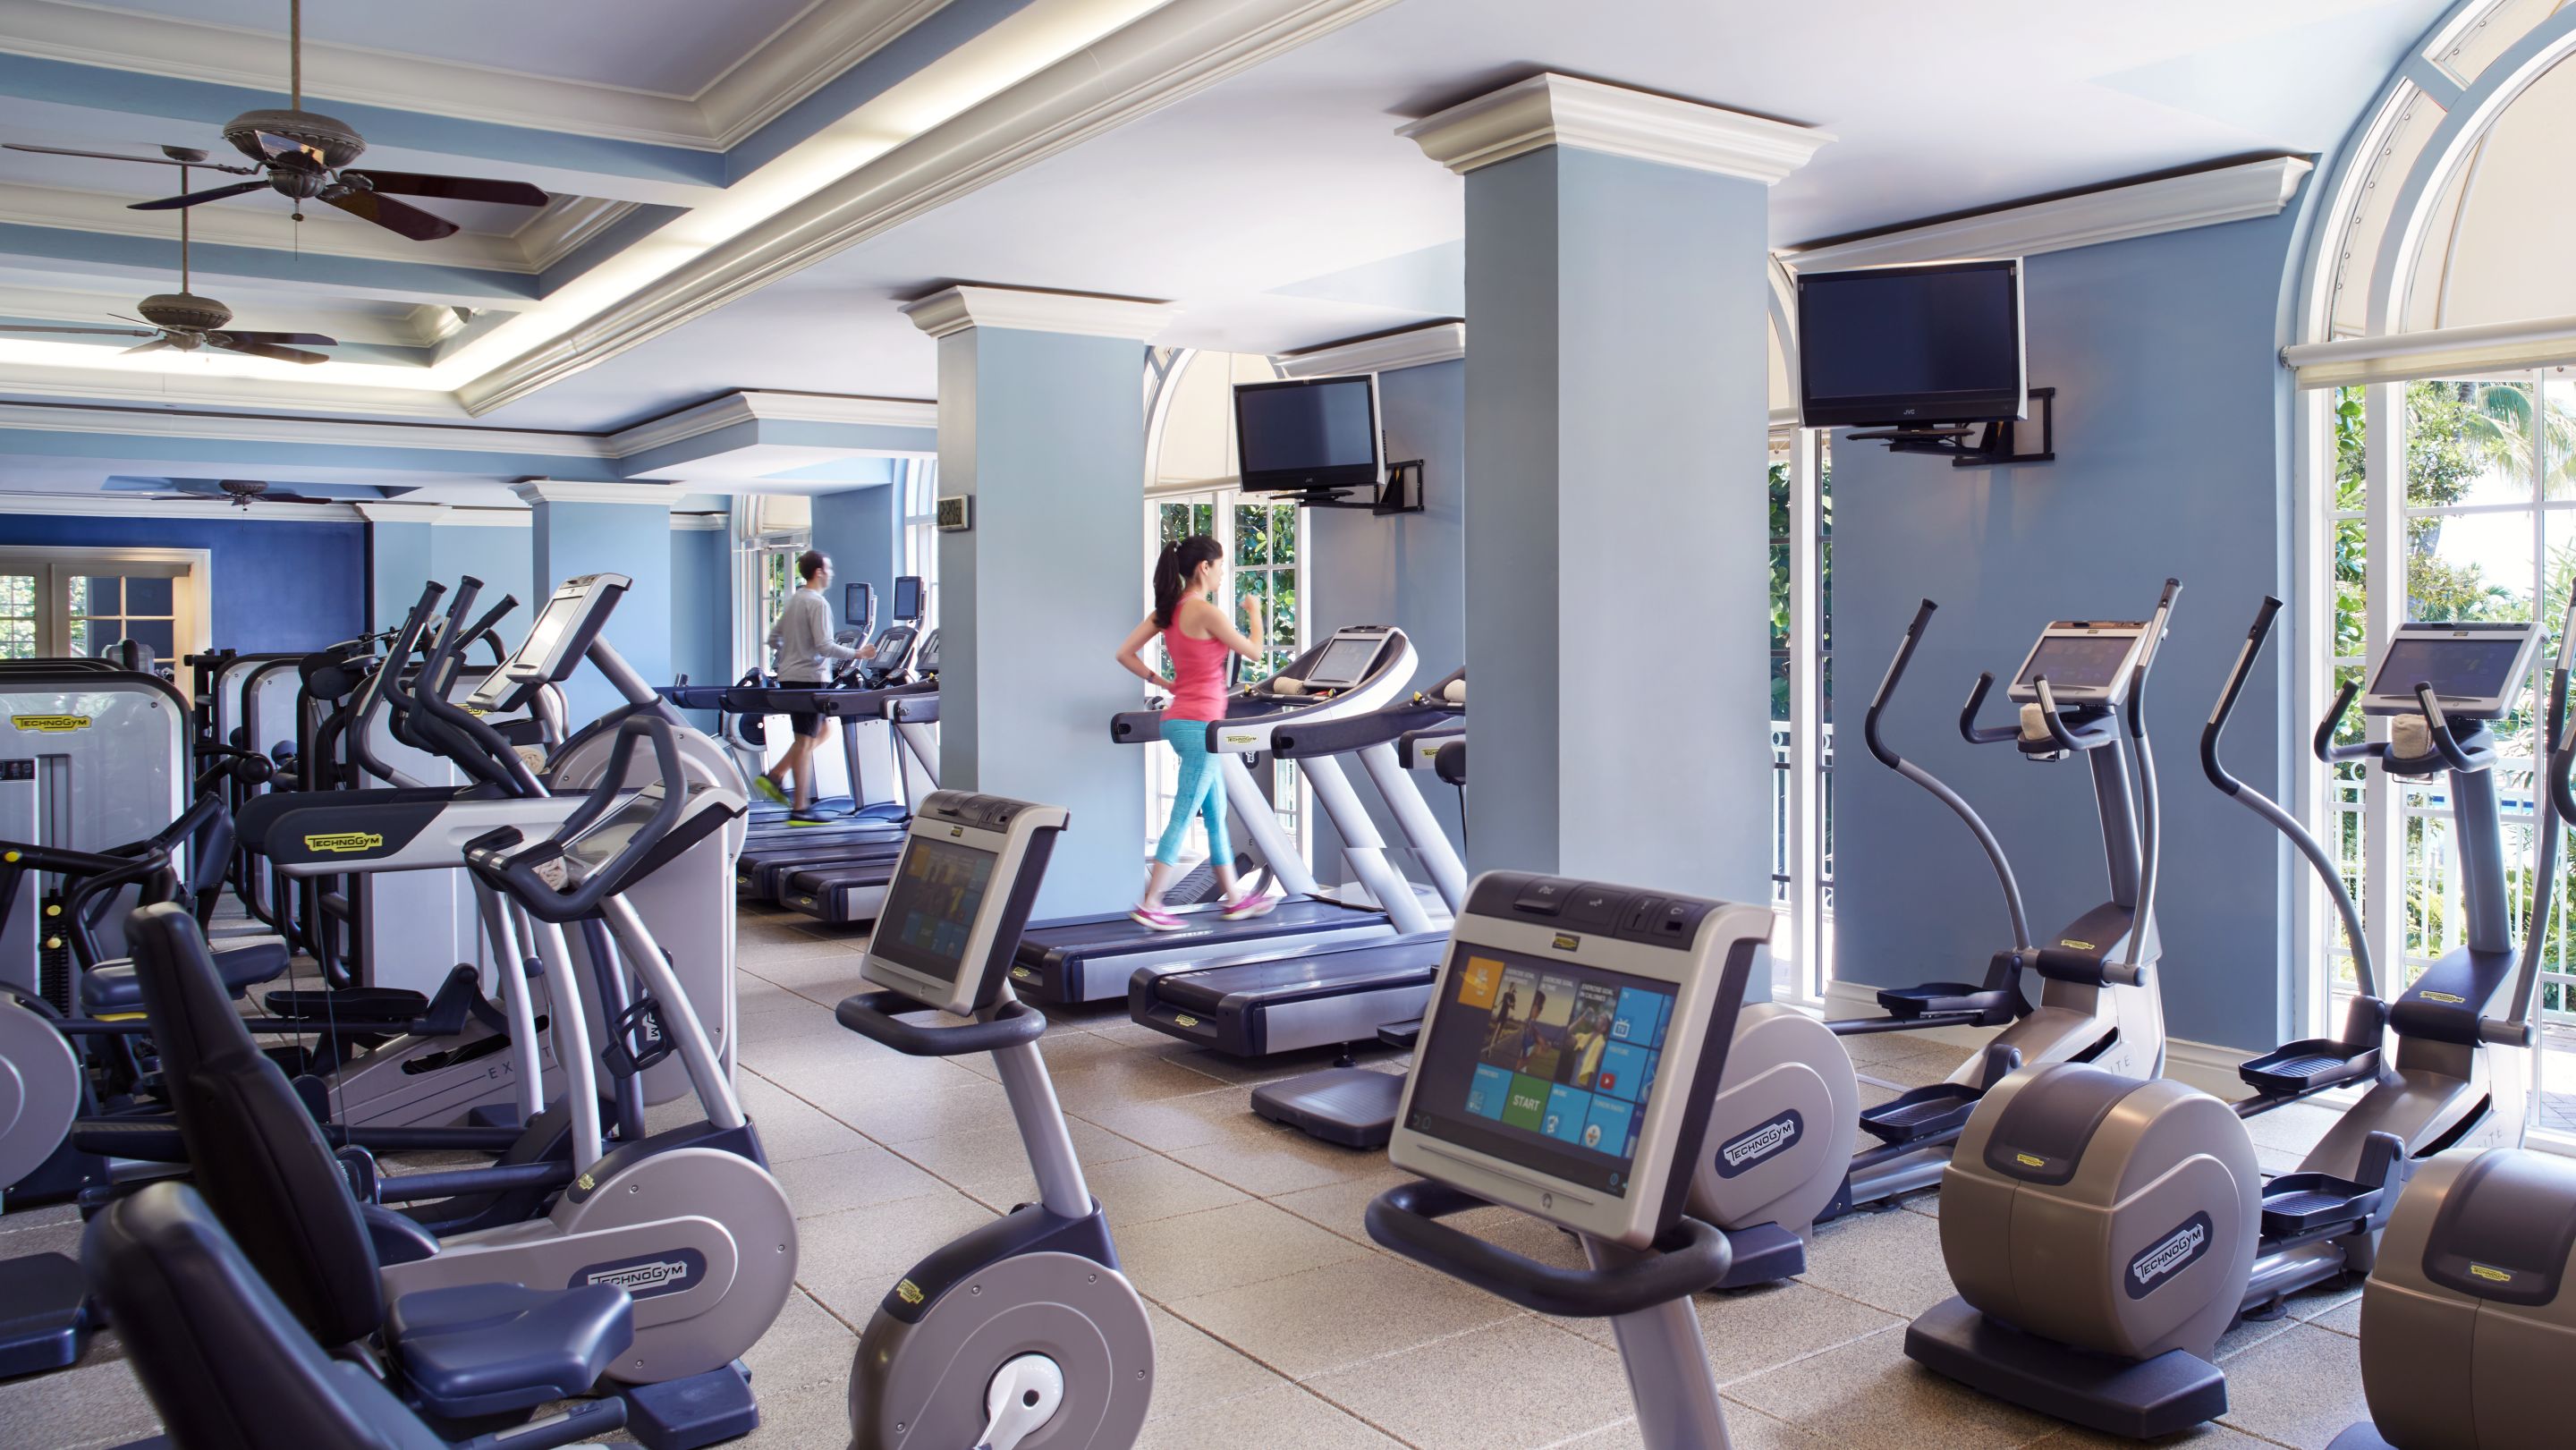 A woman on a treadmill in a large space with cardio machines